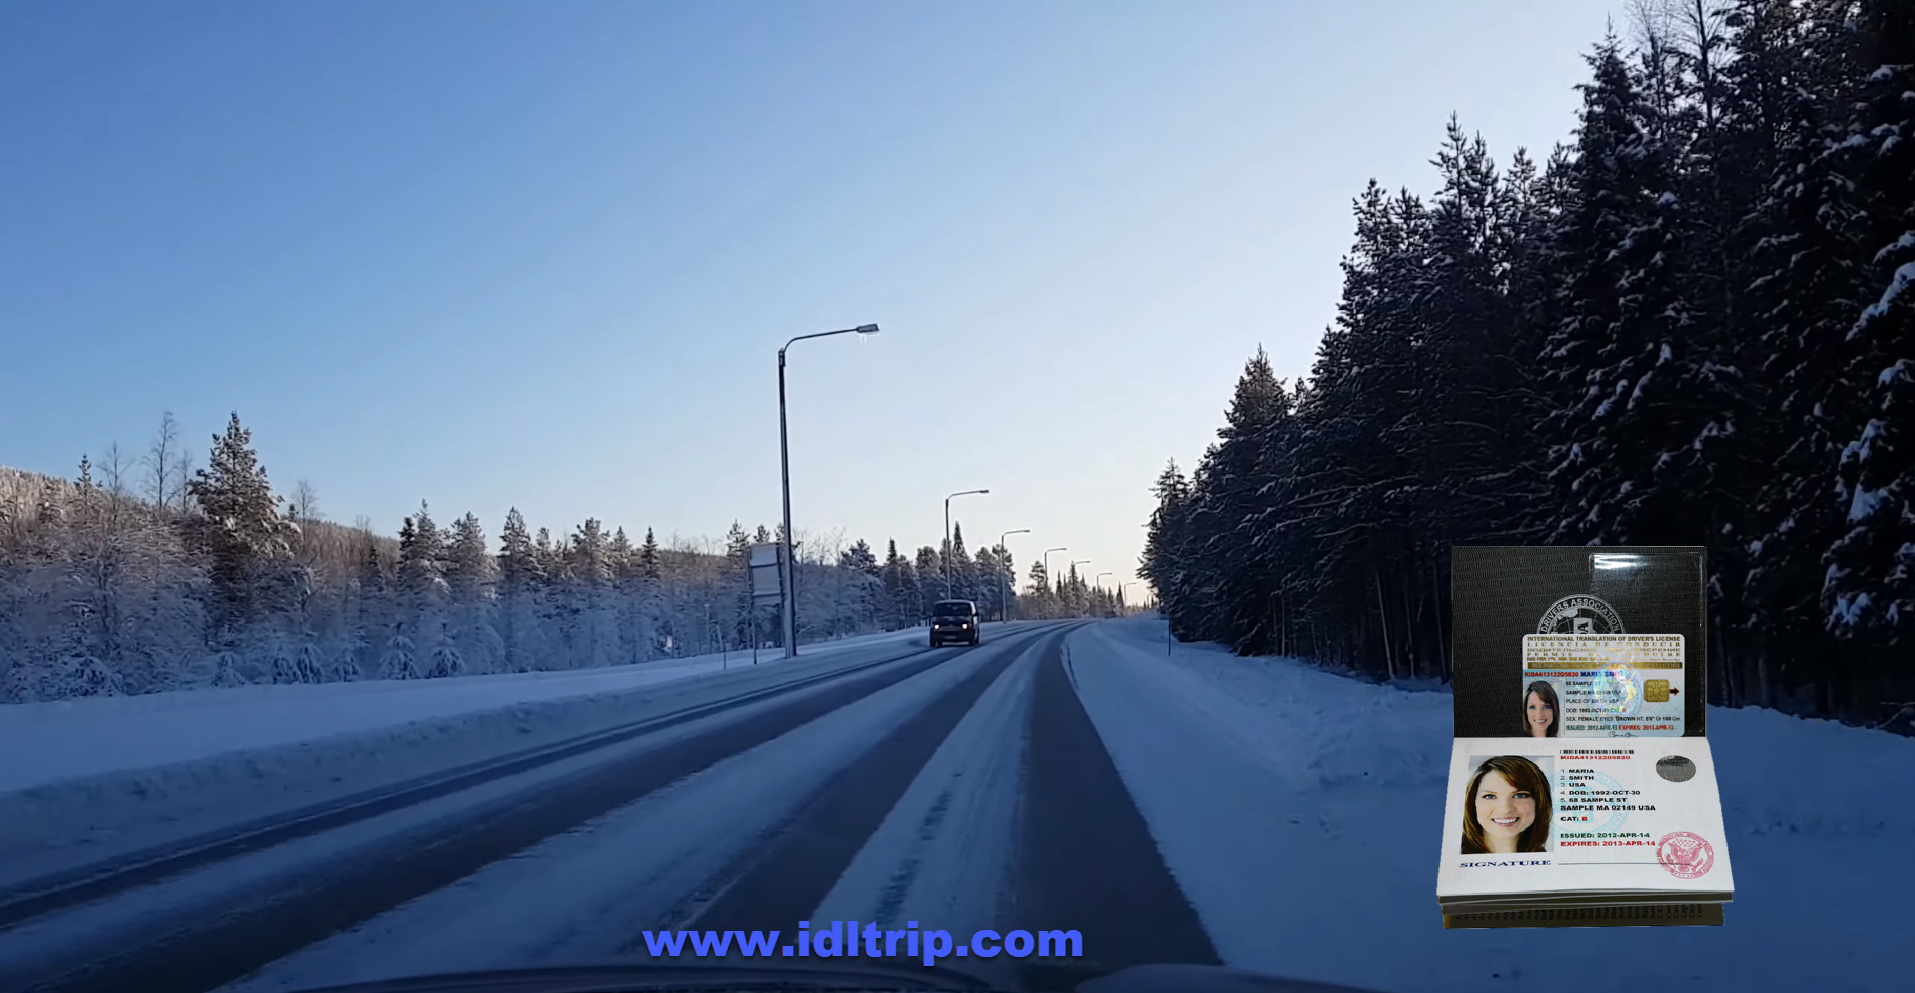 In winter, the general speed limit is reduced everywhere to 80 kph.